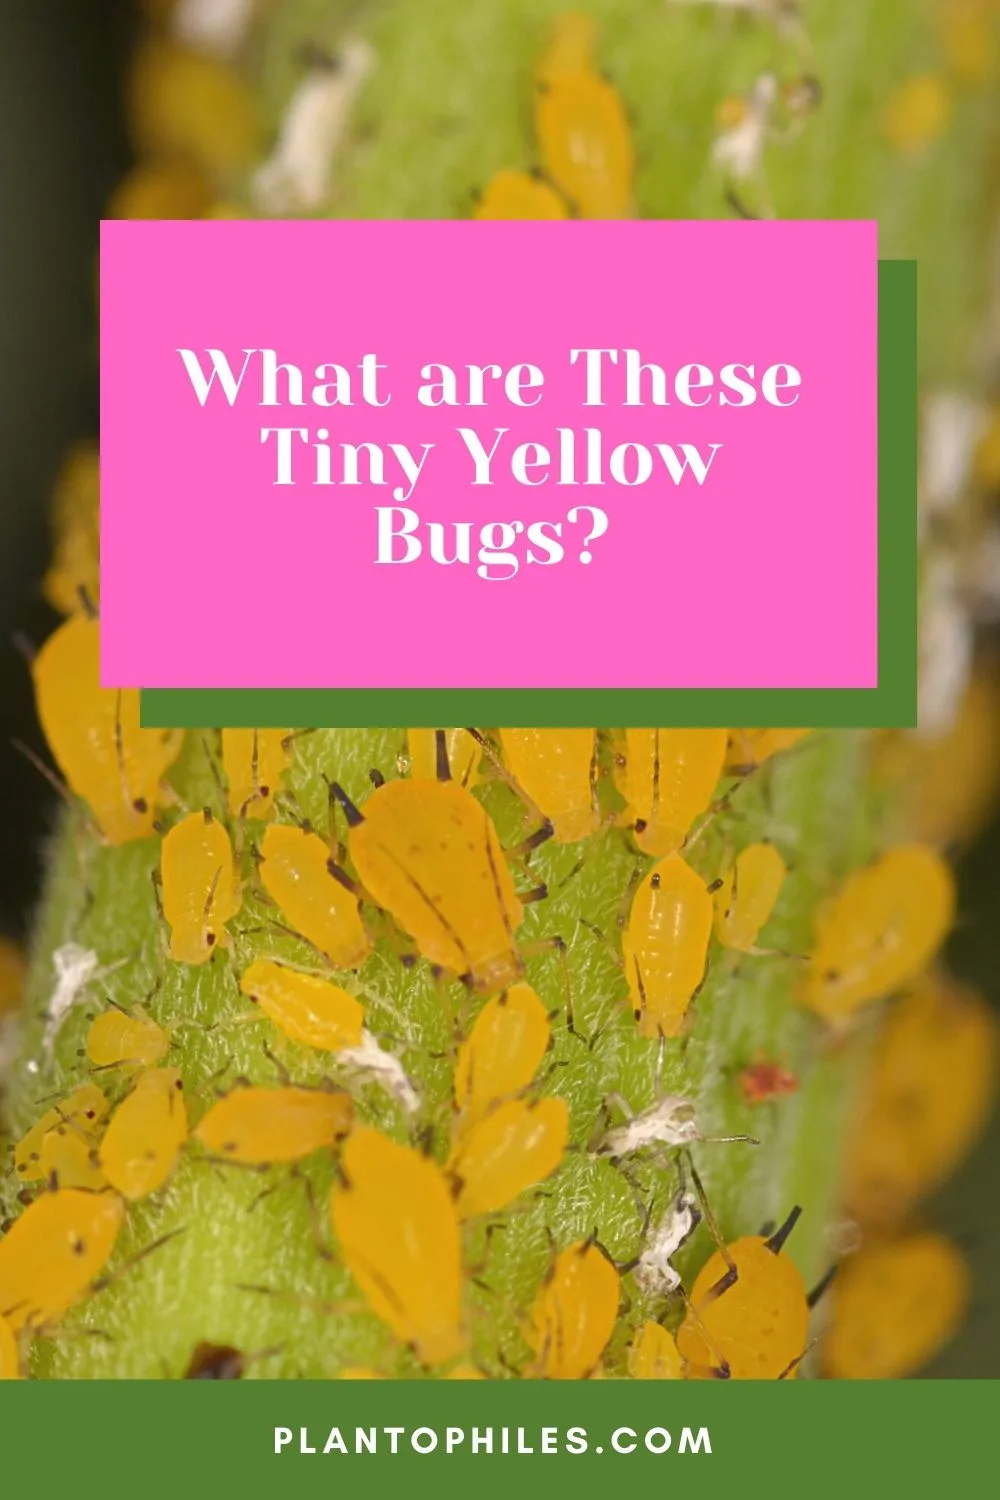 What are These Tiny Yellow Bugs?